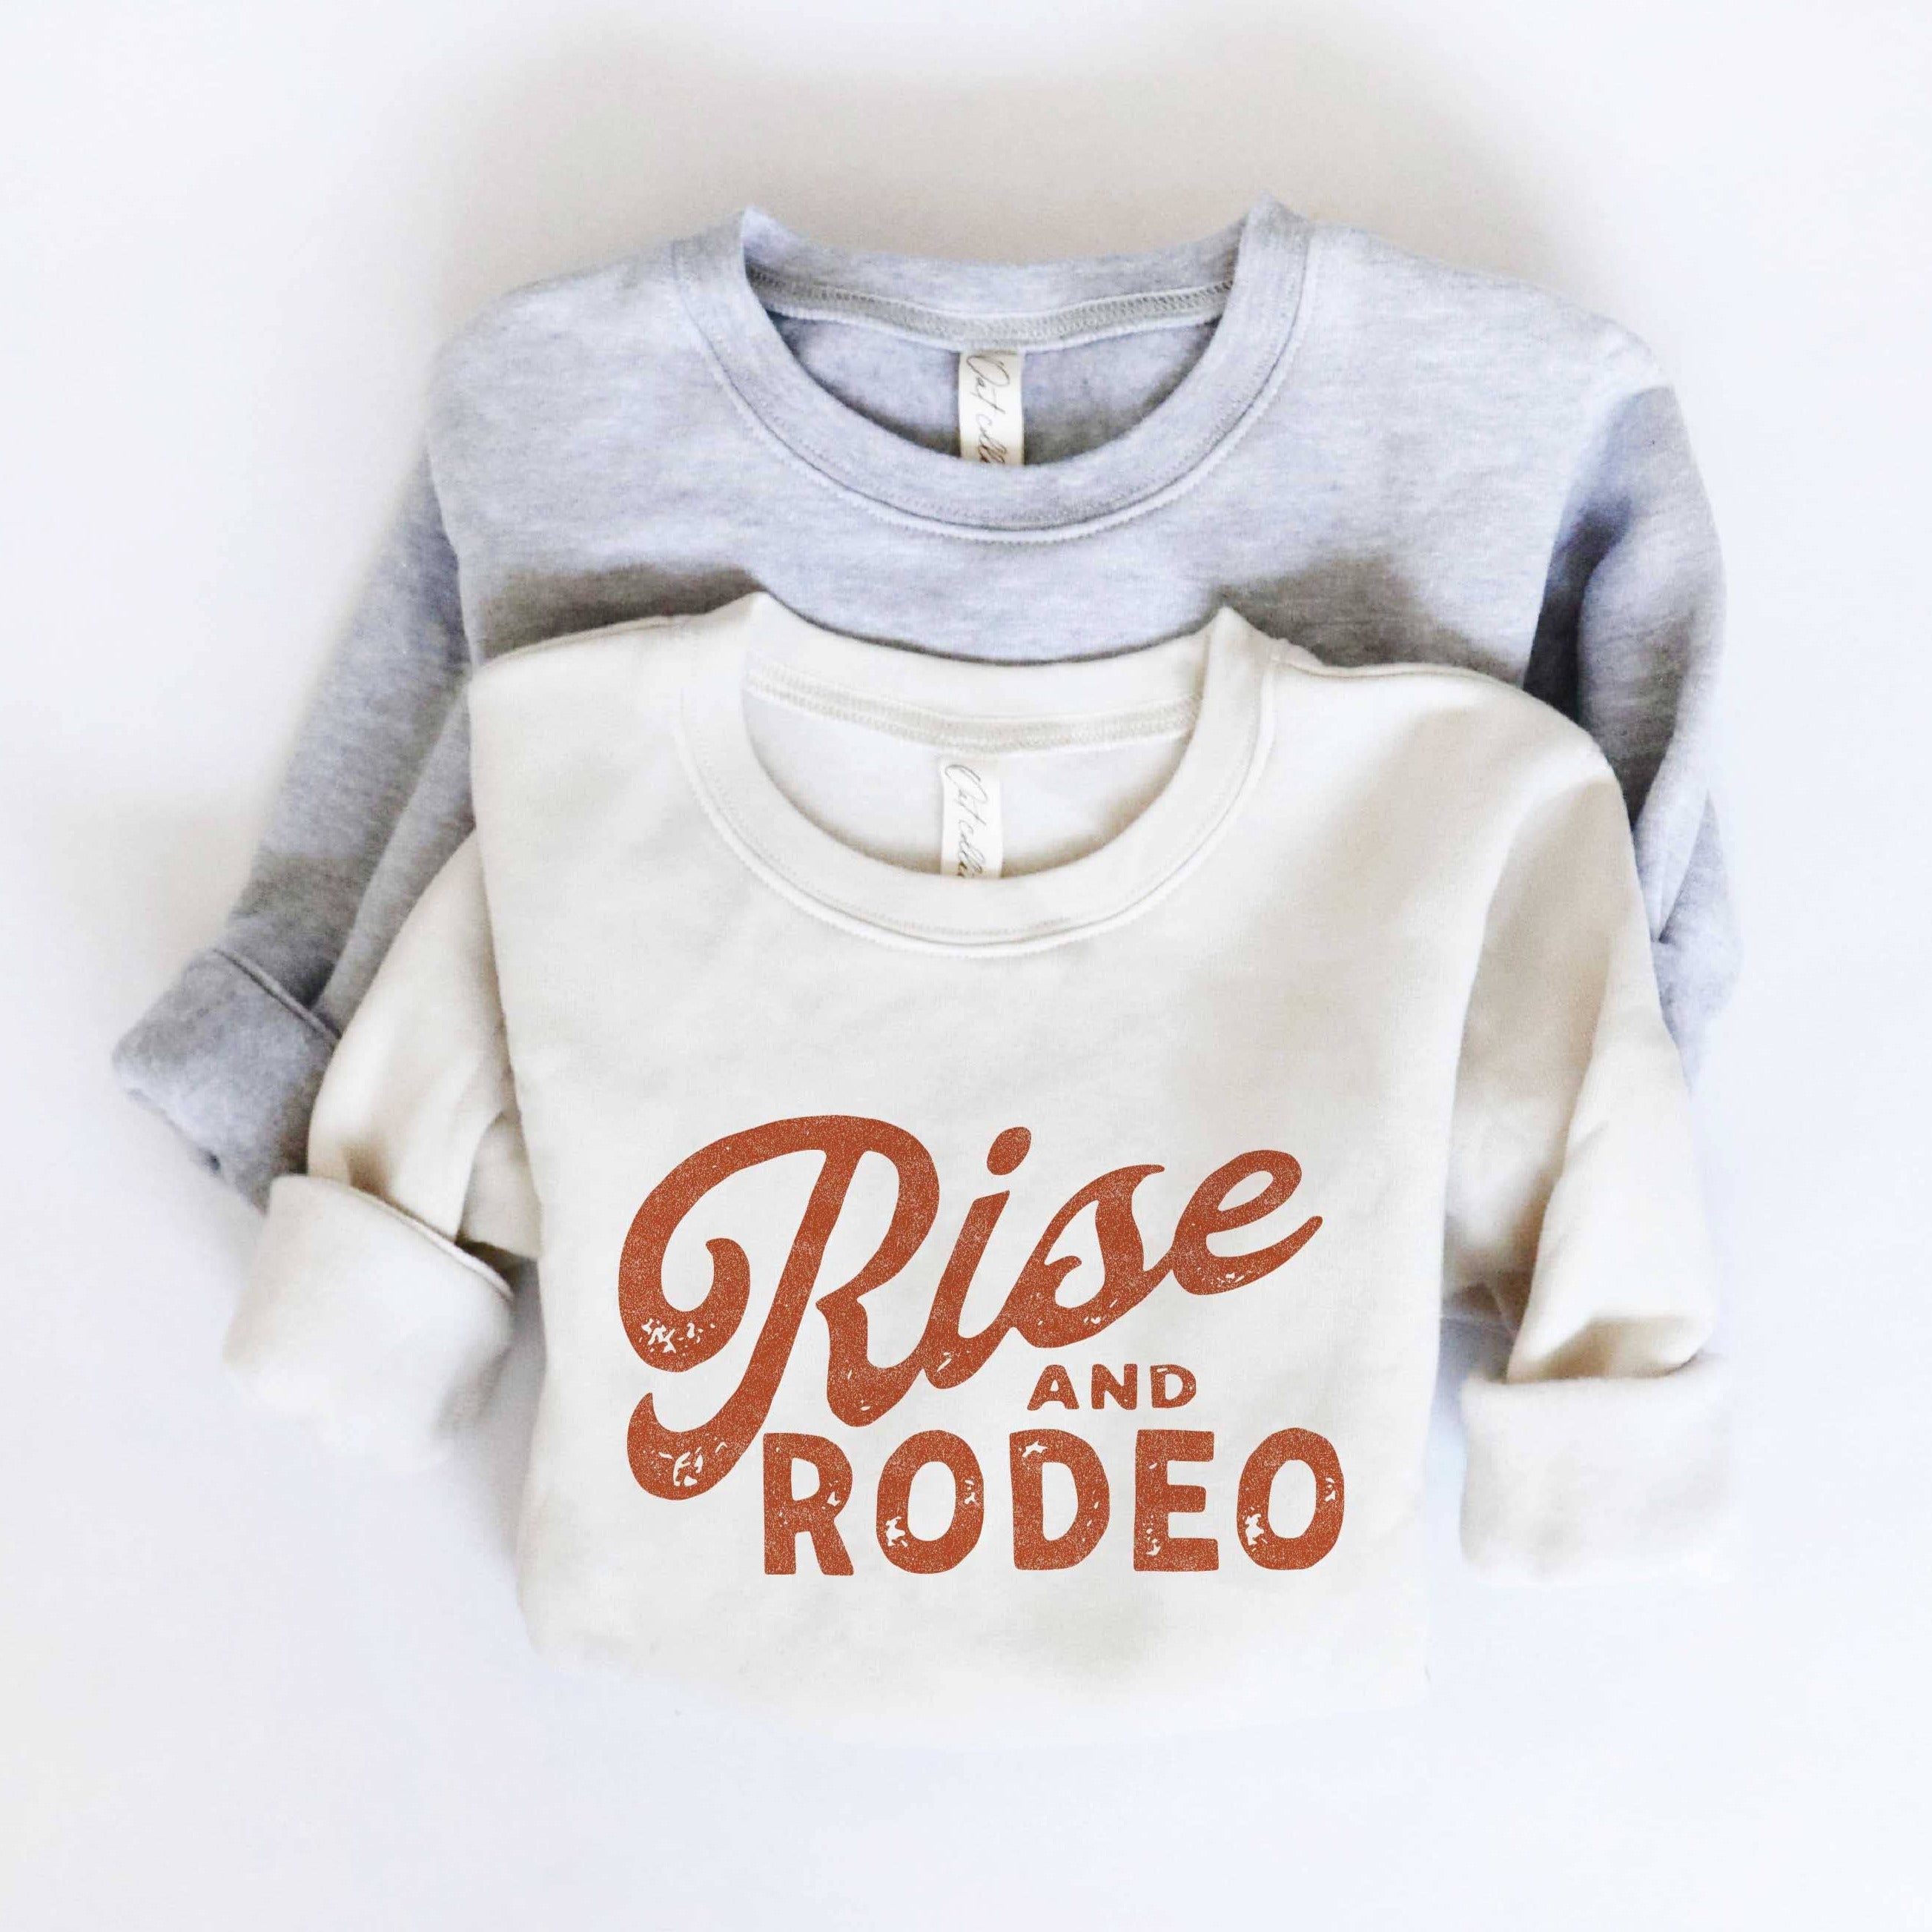 RISE AND RODEO Toddler Sweatshirt